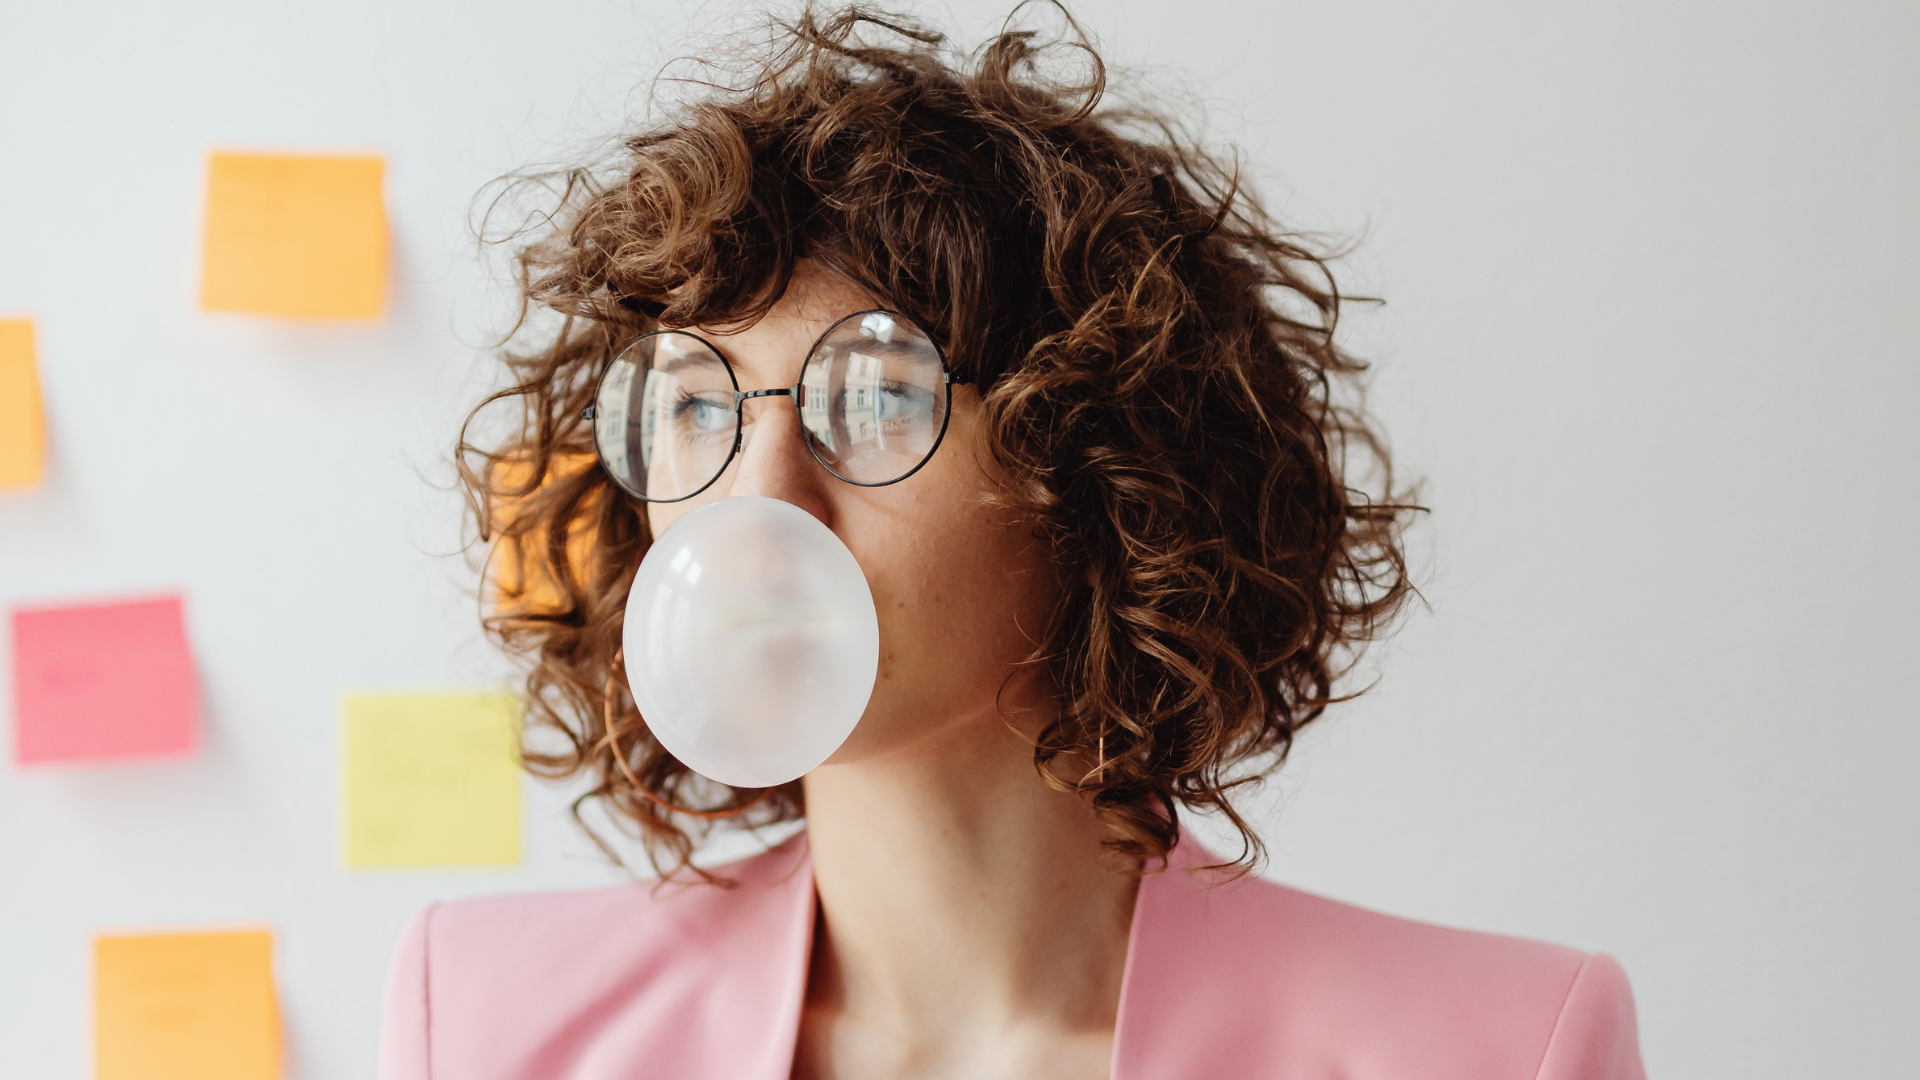 woman blowing bubble w/ chewing gum